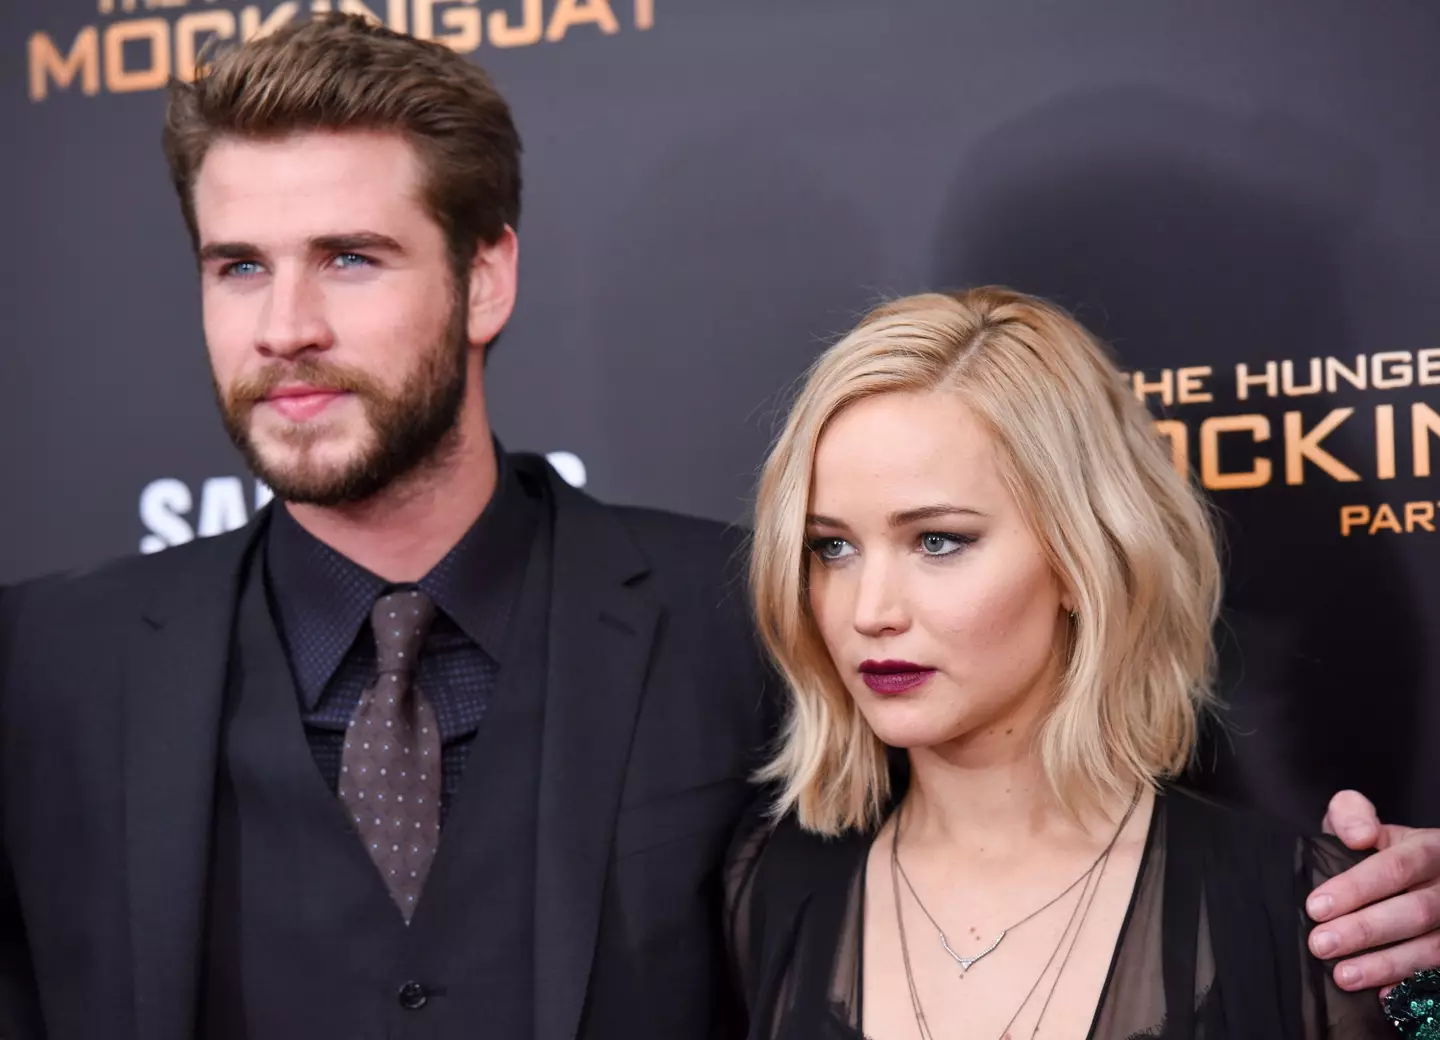 Liam Hemsworth and Jennifer Lawrence worked together on The Hunger Games. (Grant Lamos IV/FilmMagic)